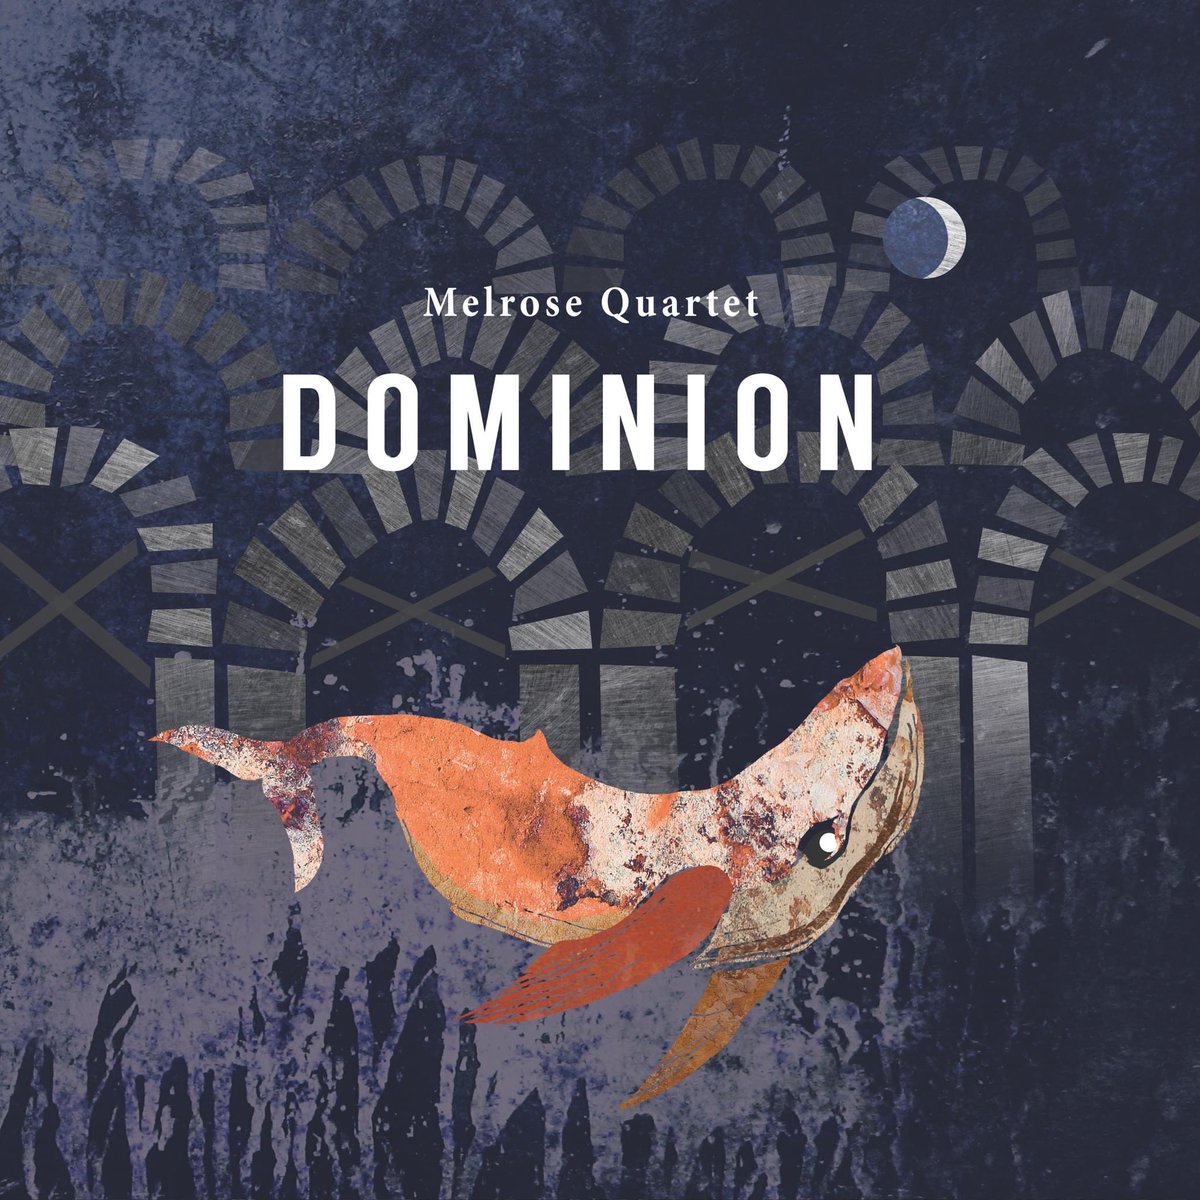 Happy Bandcamp Friday, a great day to support your favourite artists. If you’ve ever streamed Dominion, but don’t own it, here’s a chance to support our ongoing artistic endeavours! Thankyou. melrosequartet.bandcamp.com/album/dominion